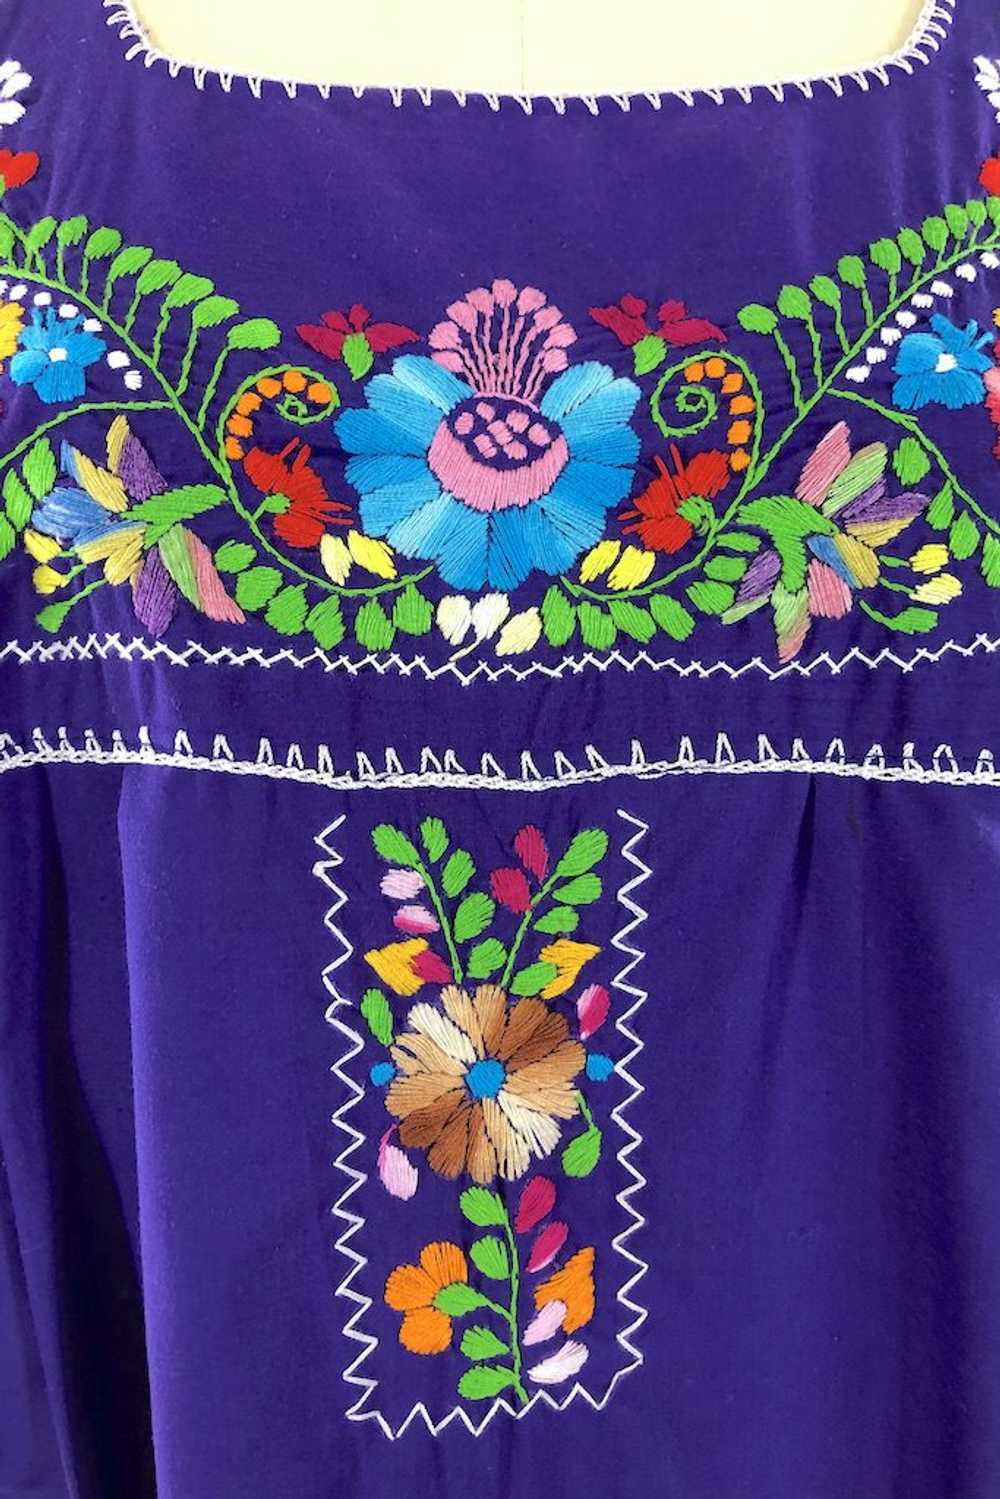 Vintage Embroidered Mexican Dress - image 4